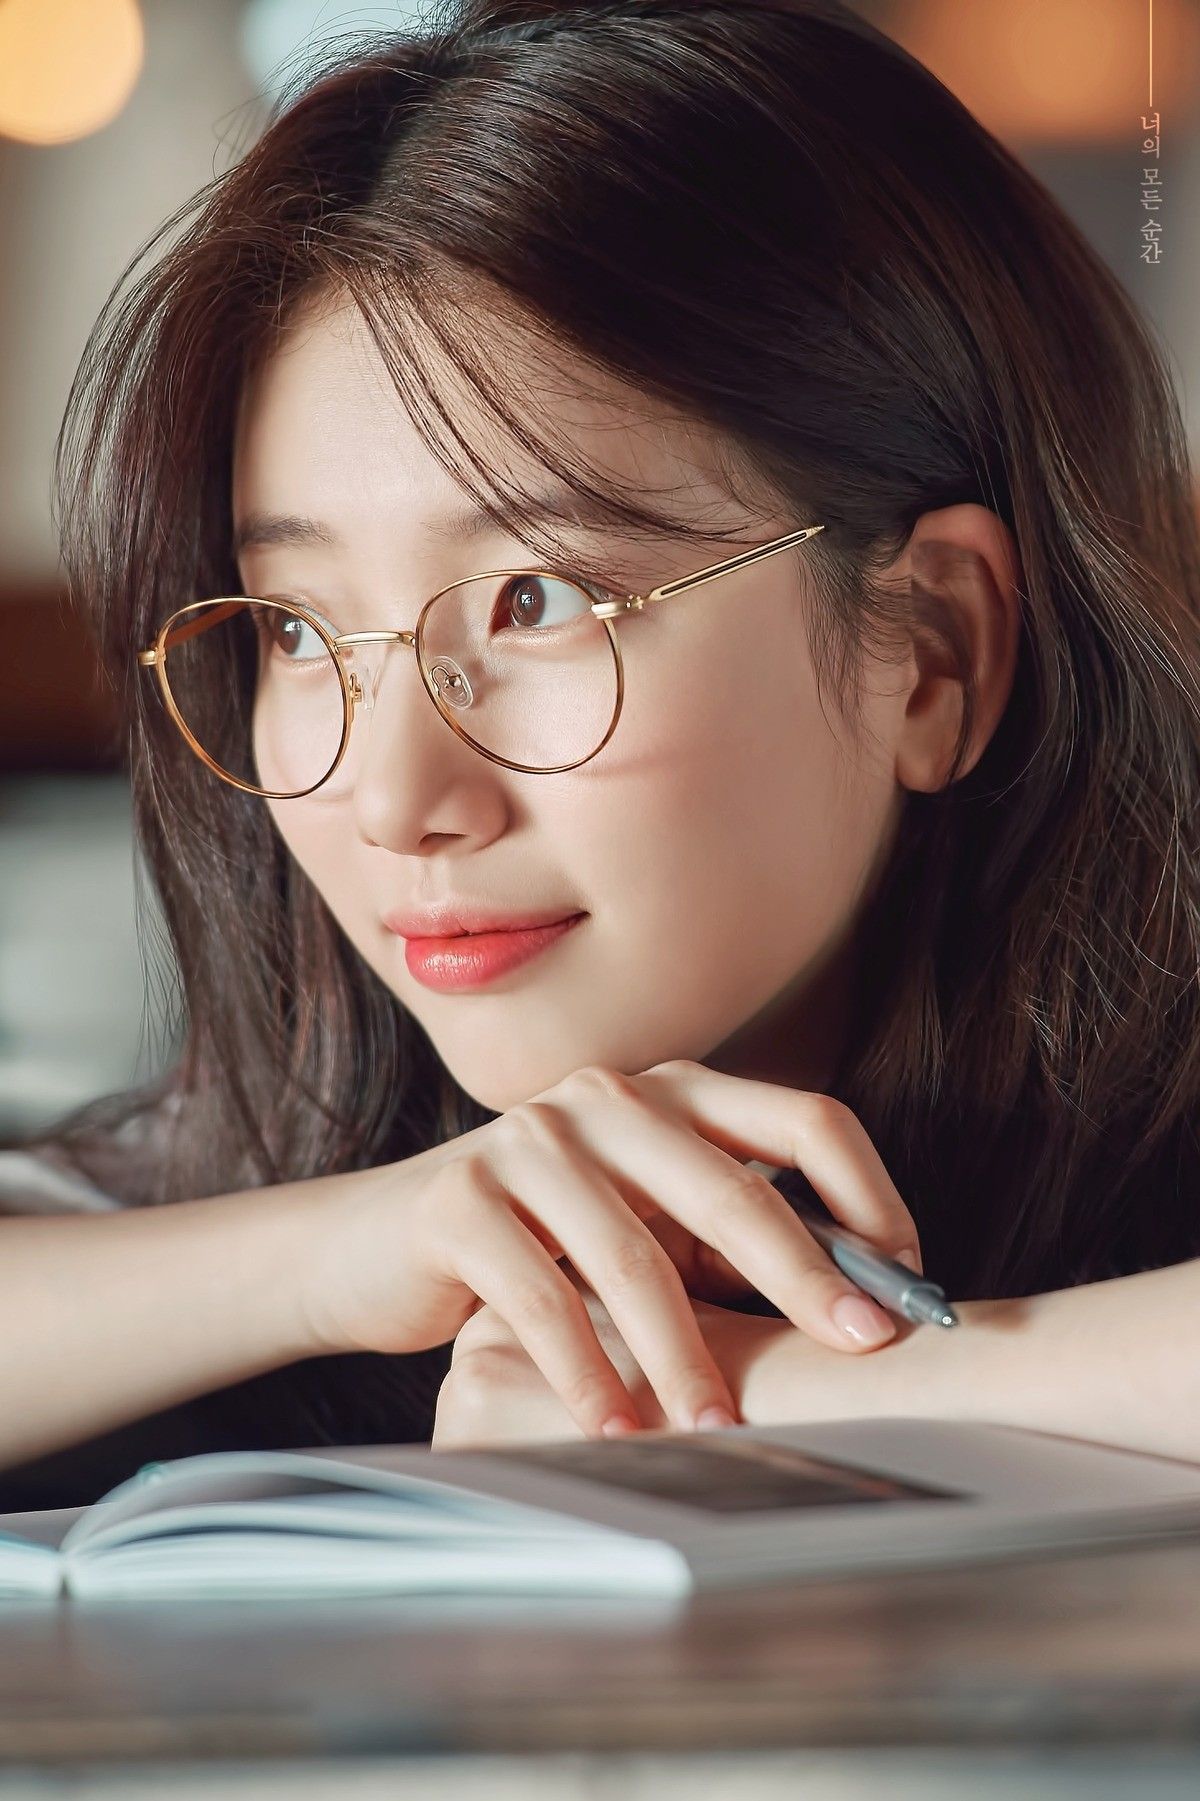 People 1200x1801 Bae Suzy Suzy women with glasses Asian face glasses women